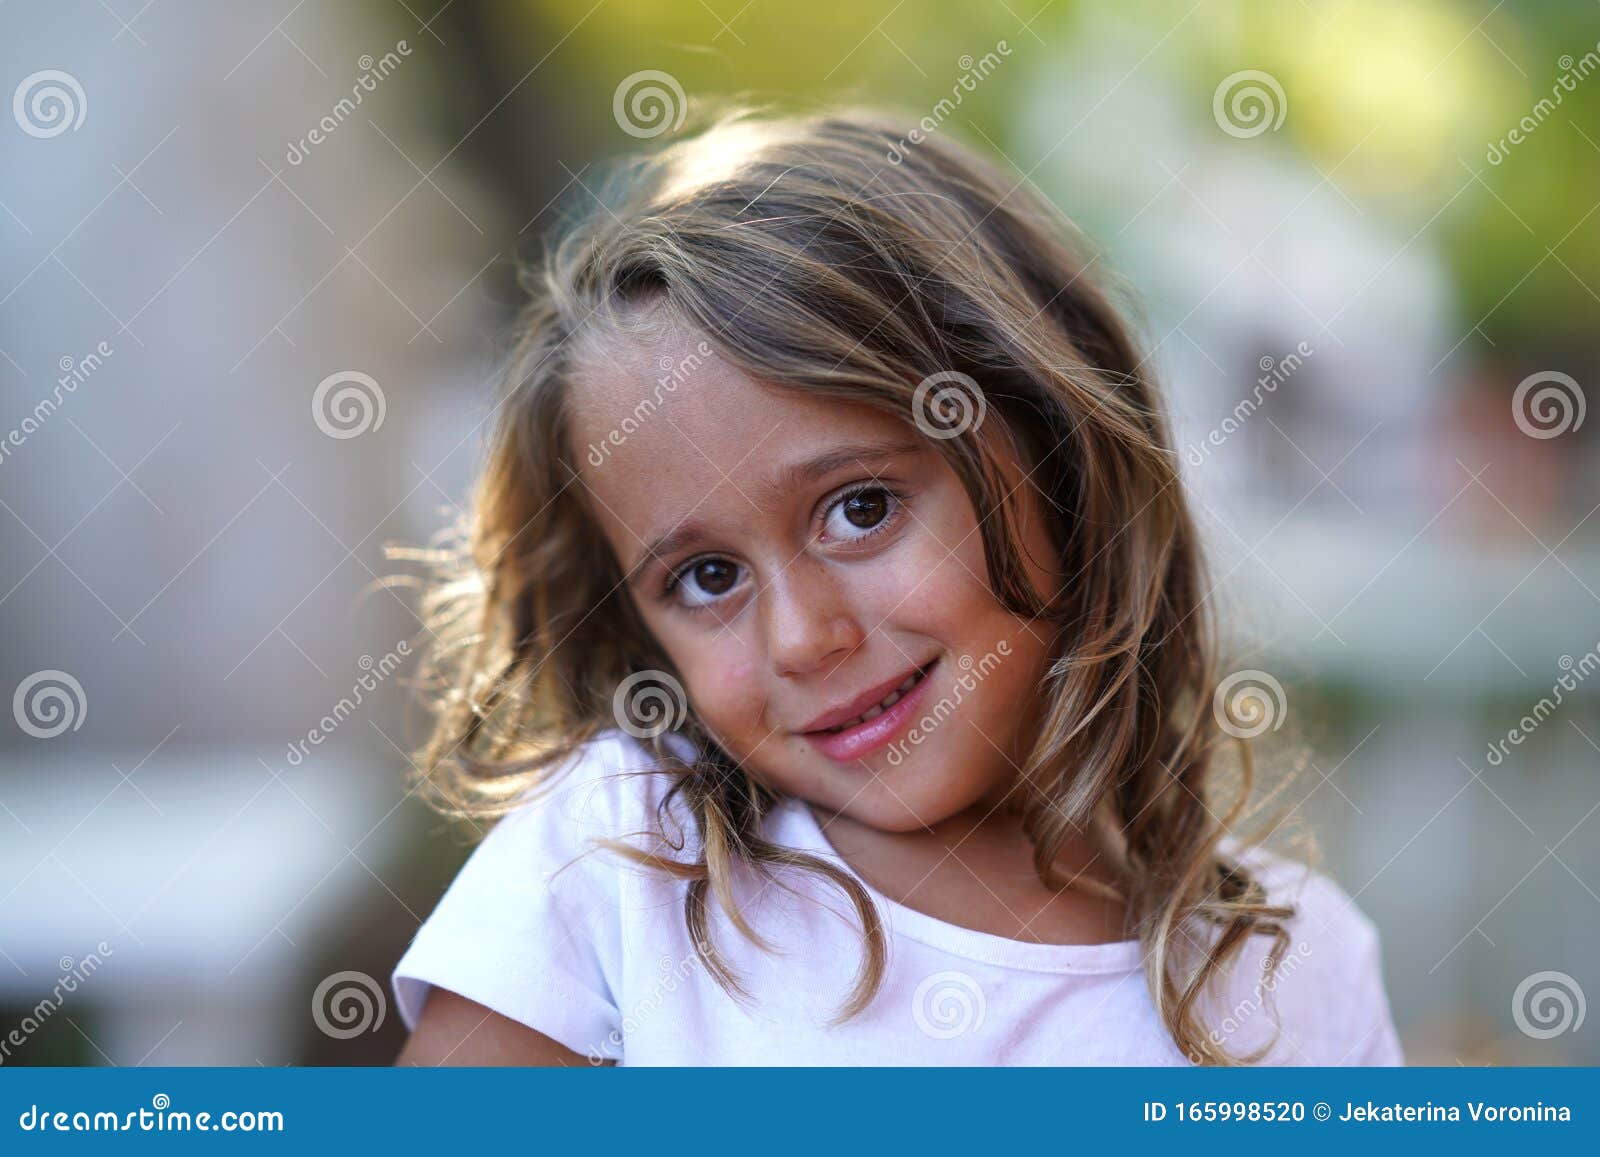 Portrait of a Very Cute 4 Year Old Girl Who Smiles and Looks ...